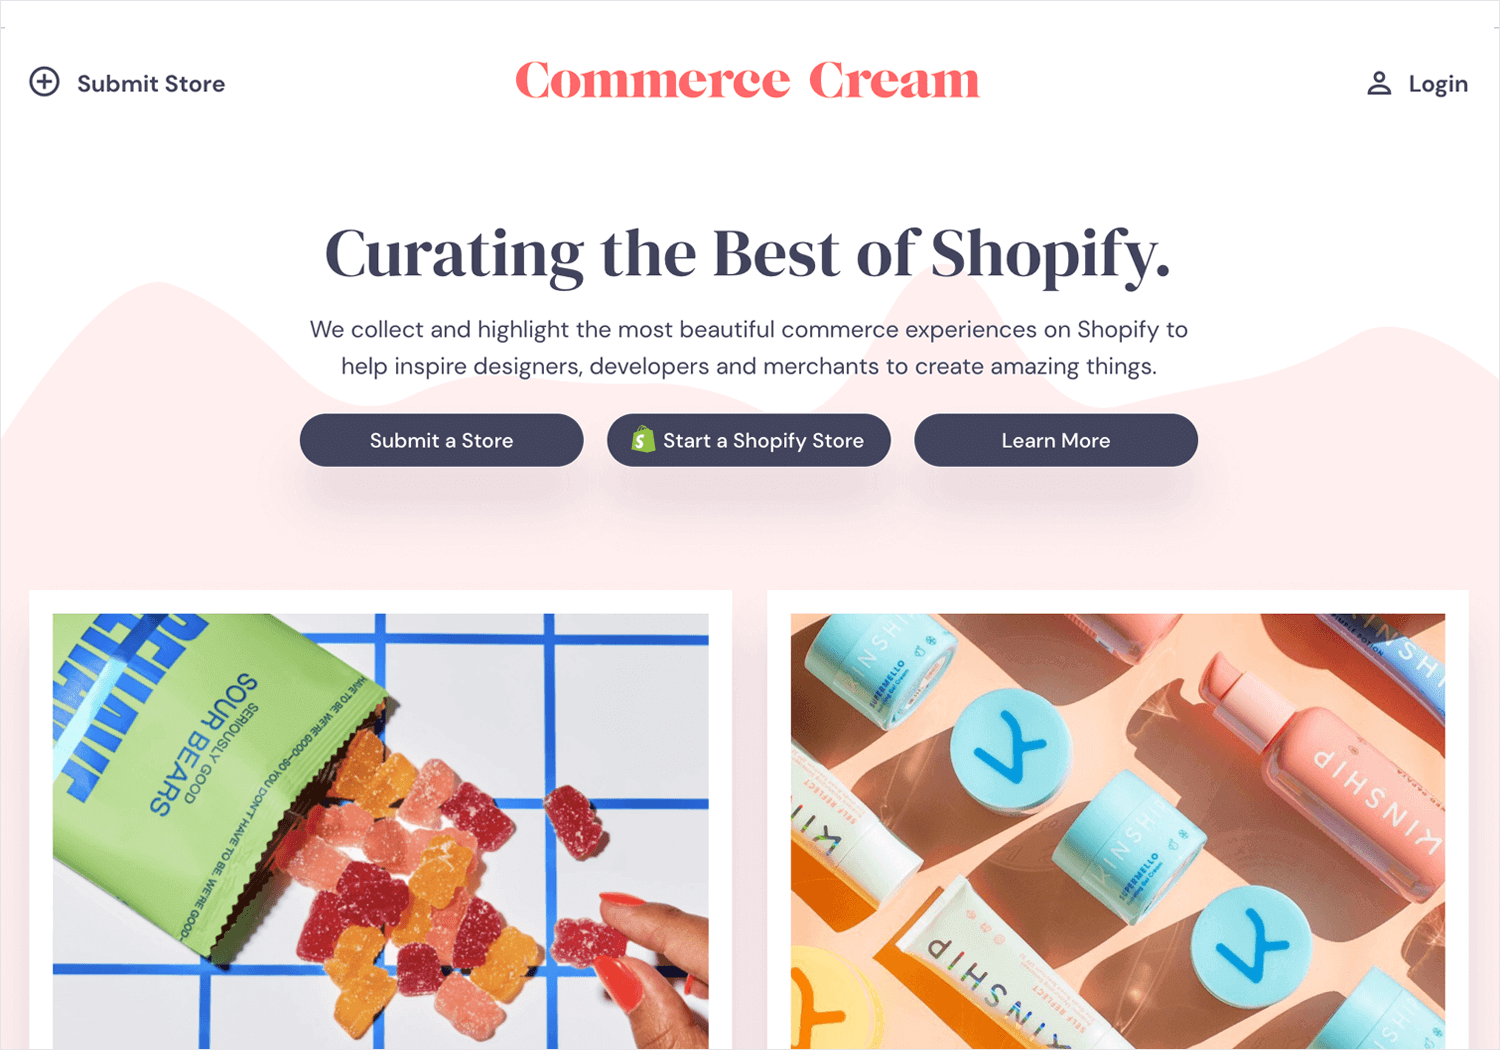 ecommerce cream as place for web design inspiration